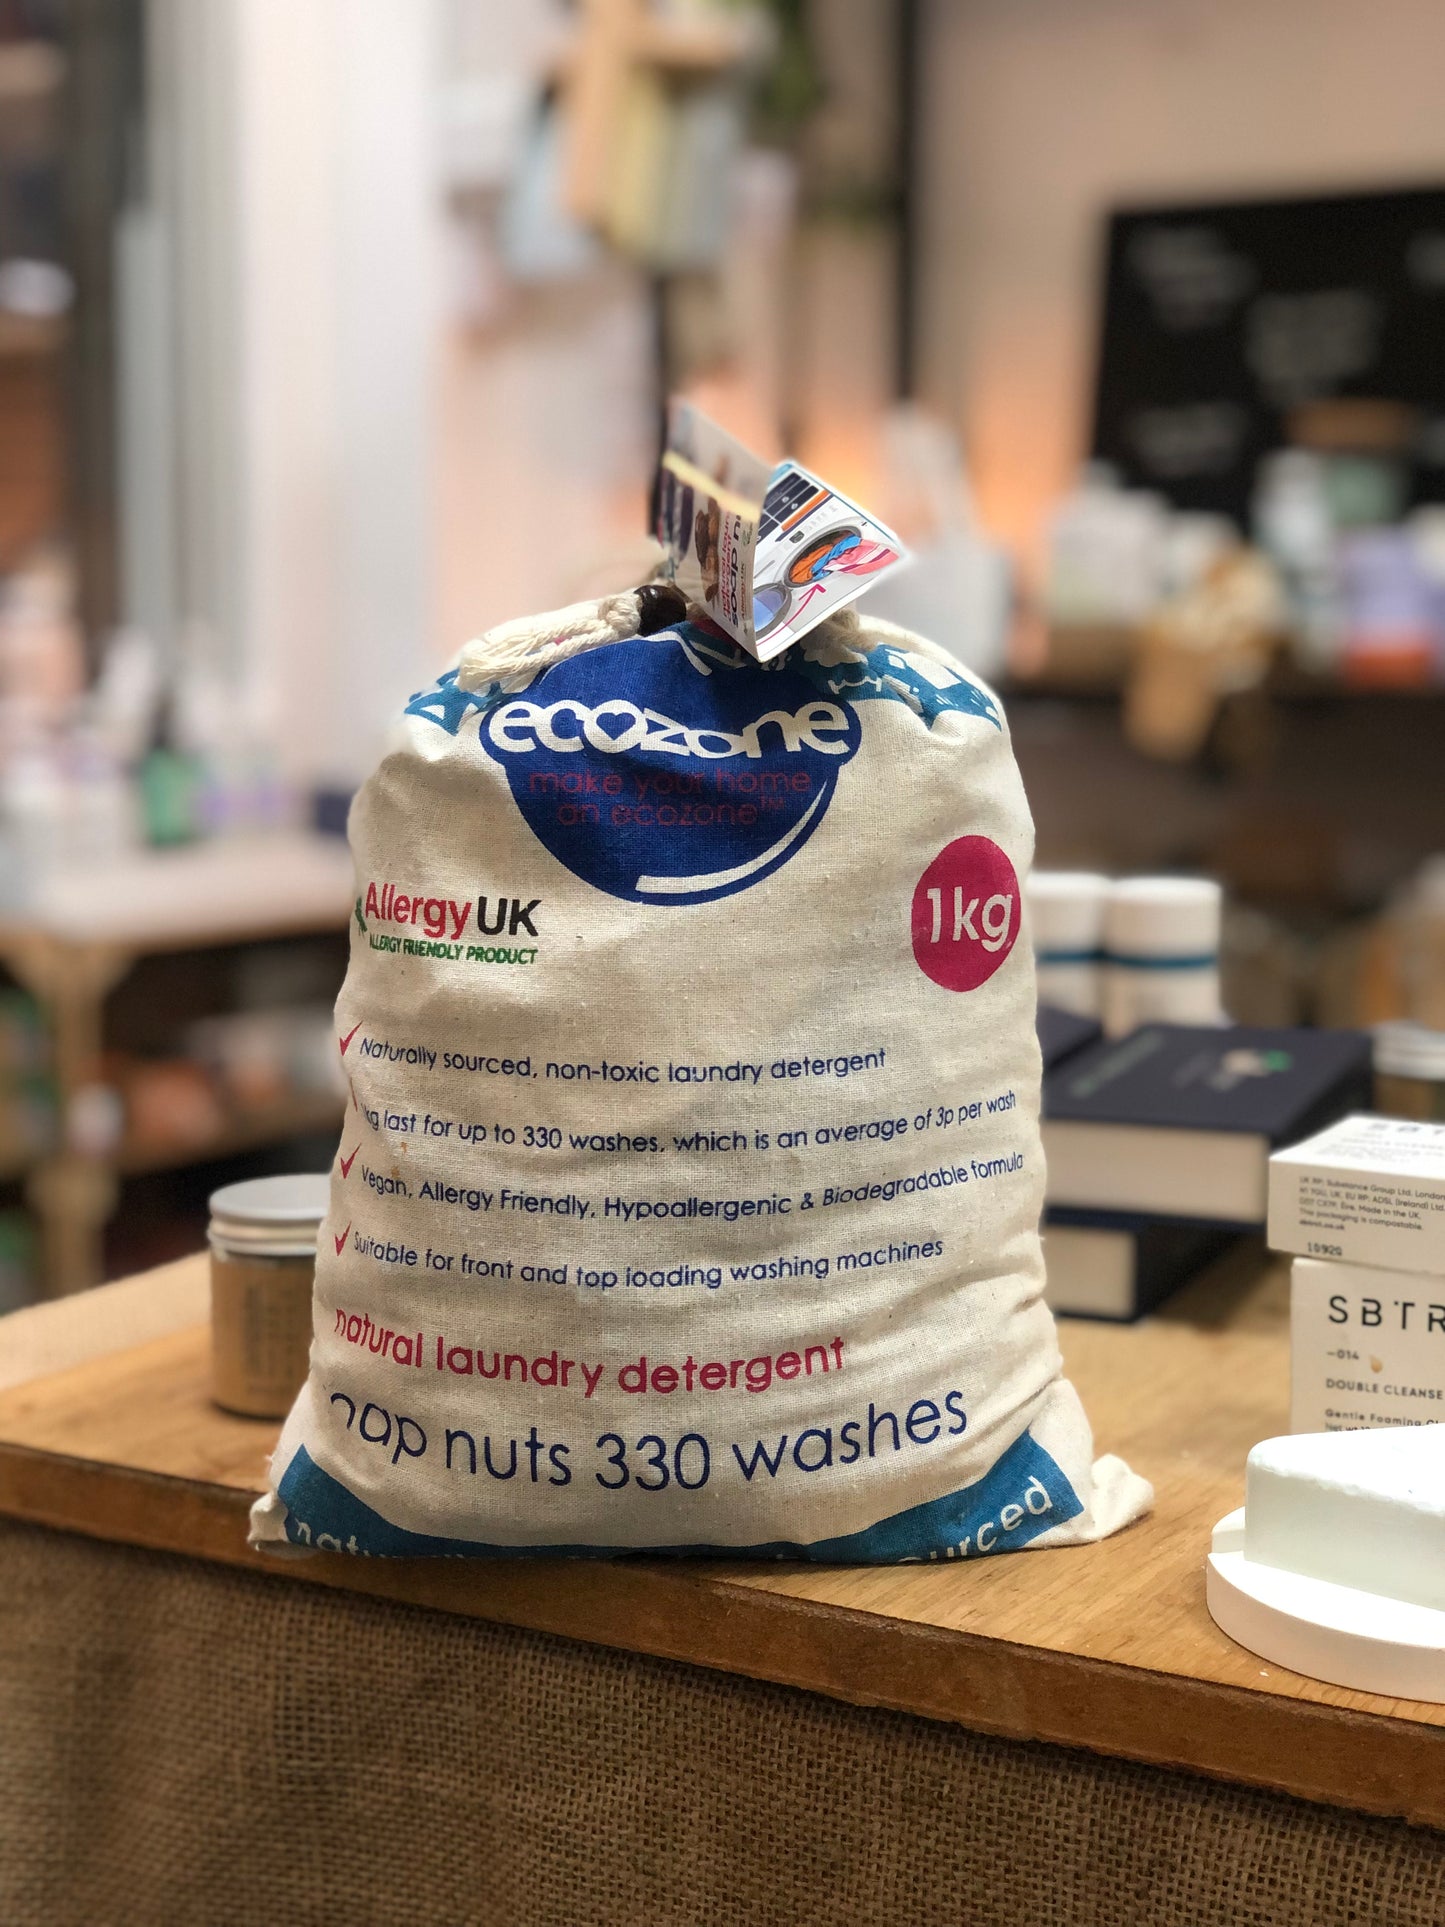 eco zone soap nuts, 1kg bag, in store at weigh and pay brixton